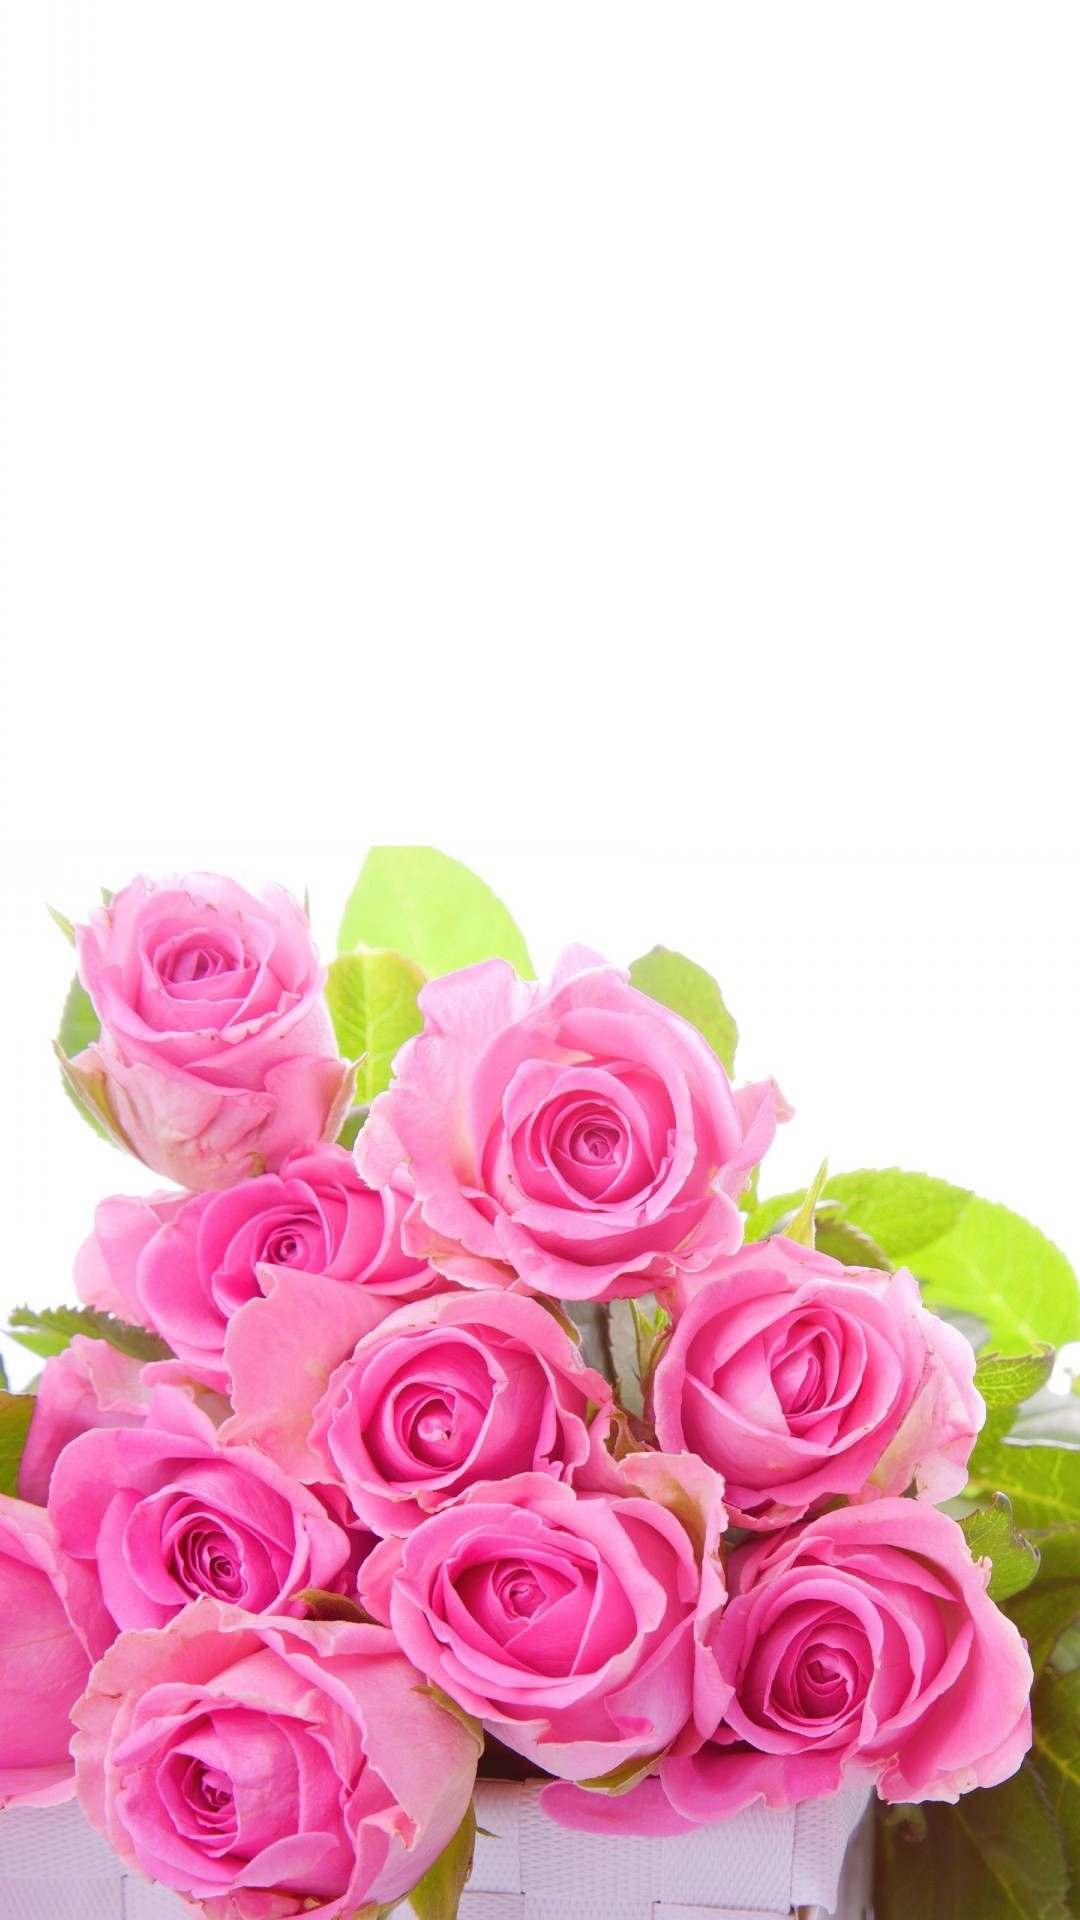 1080x1920 Pink roses Flower Wallpaper For iPhone resolution 